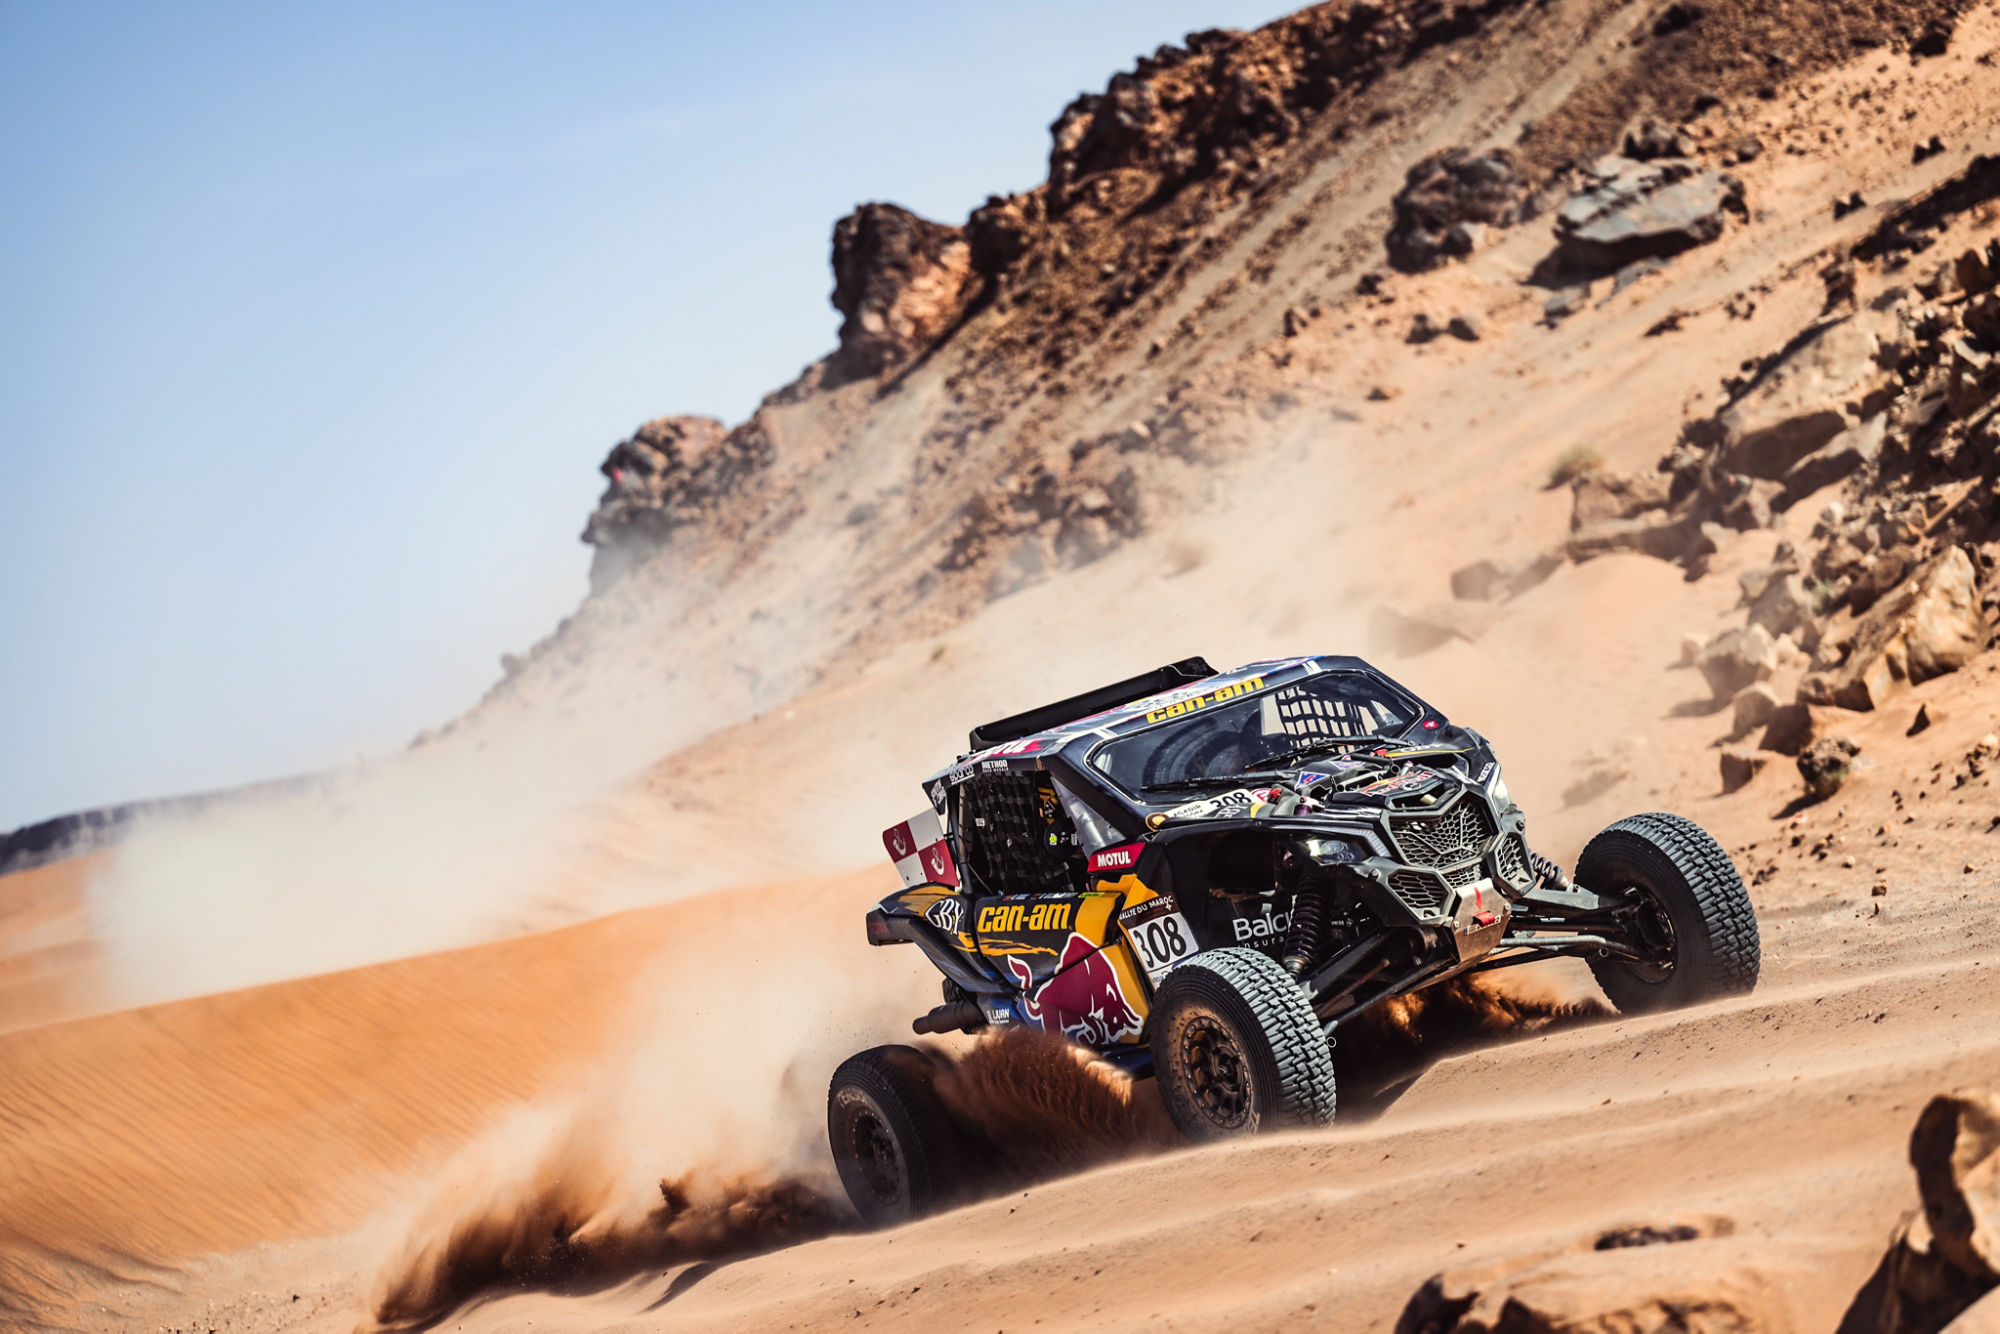 A Can-Am Maverick competing in the dunes